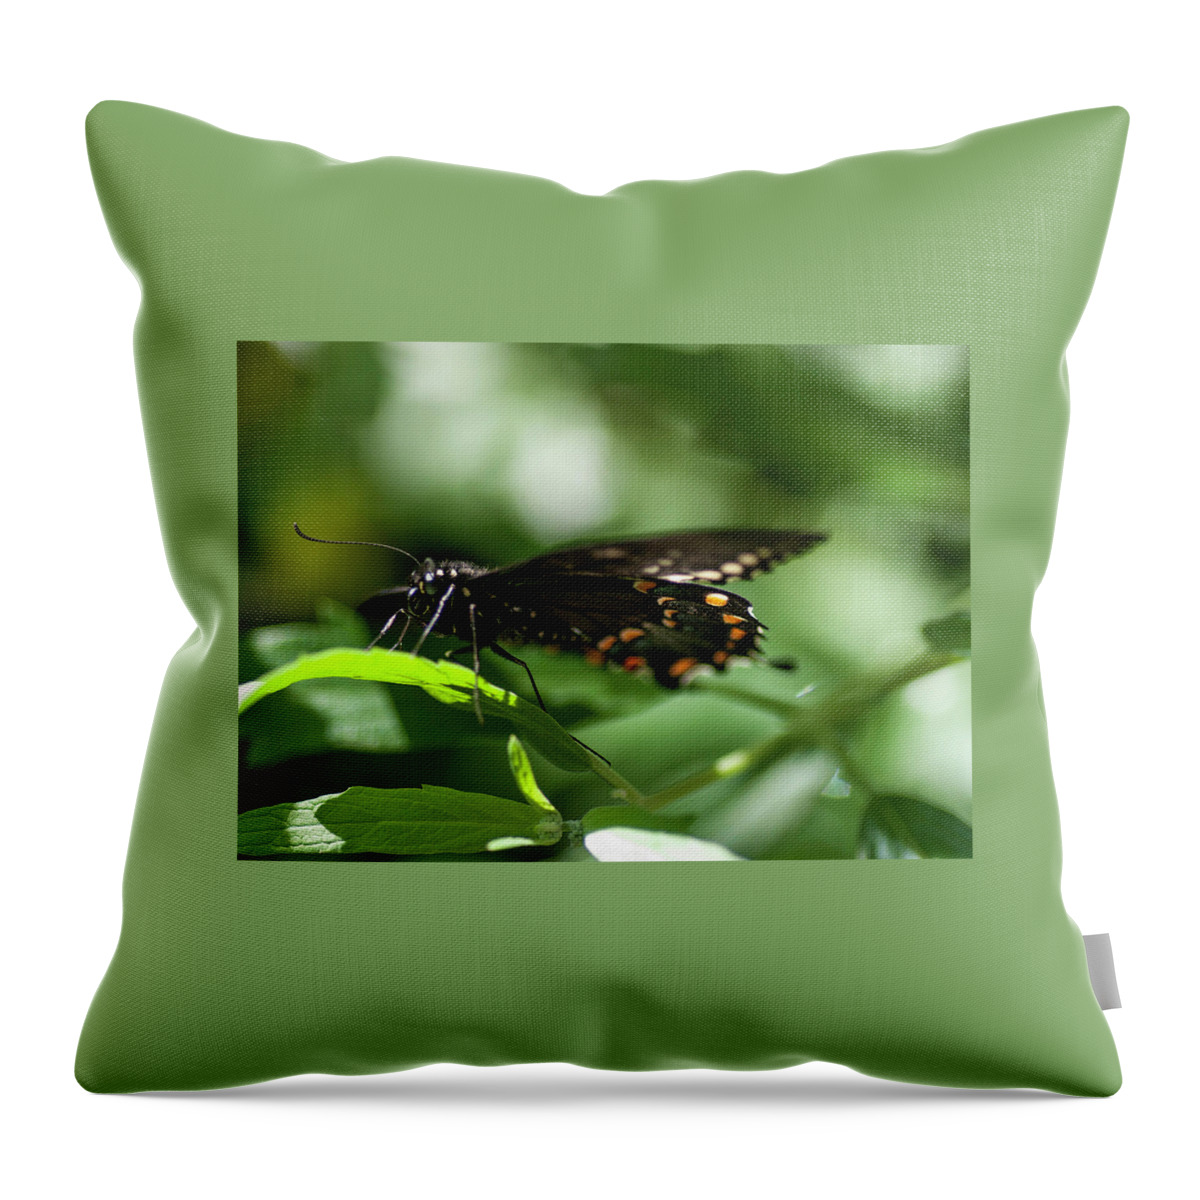 Photography Throw Pillow featuring the photograph Low Profile by Kathleen Messmer